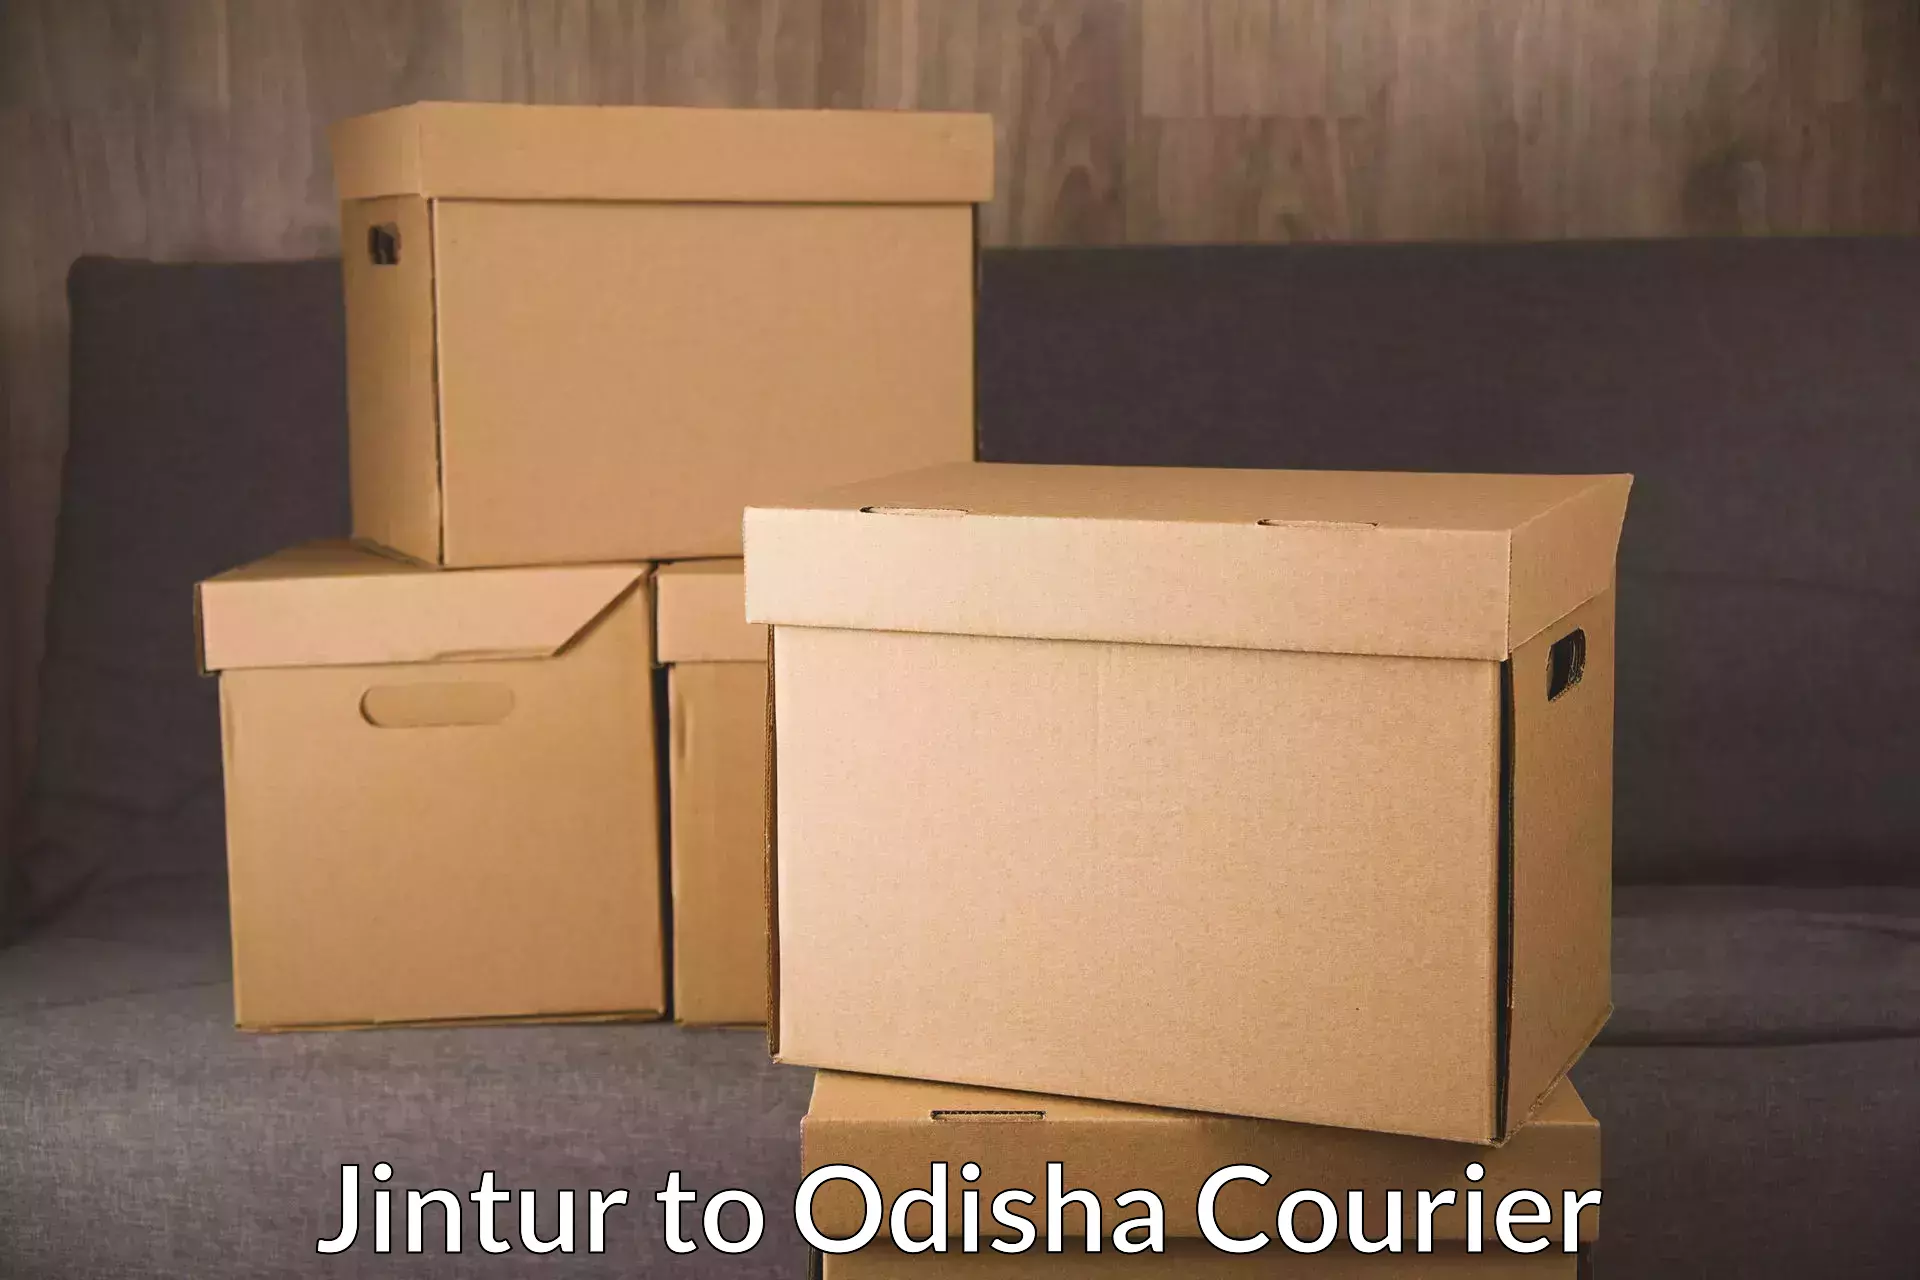 State-of-the-art courier technology Jintur to Kandhamal